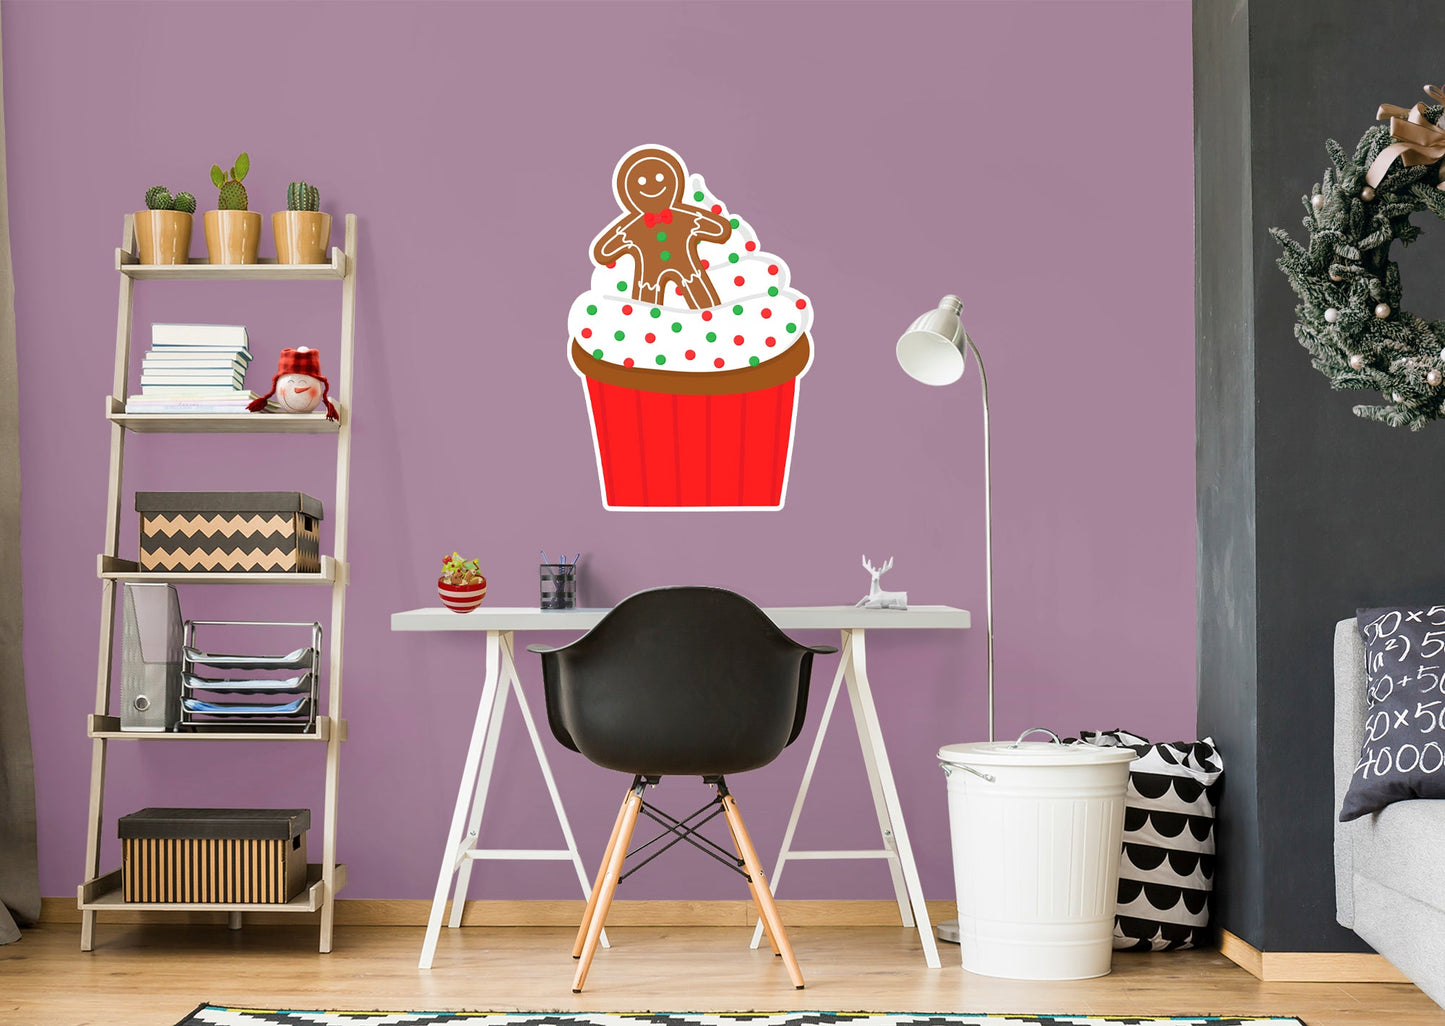 Christmas: Gingerbread Man in Cupcake Icon - Removable Adhesive Decal